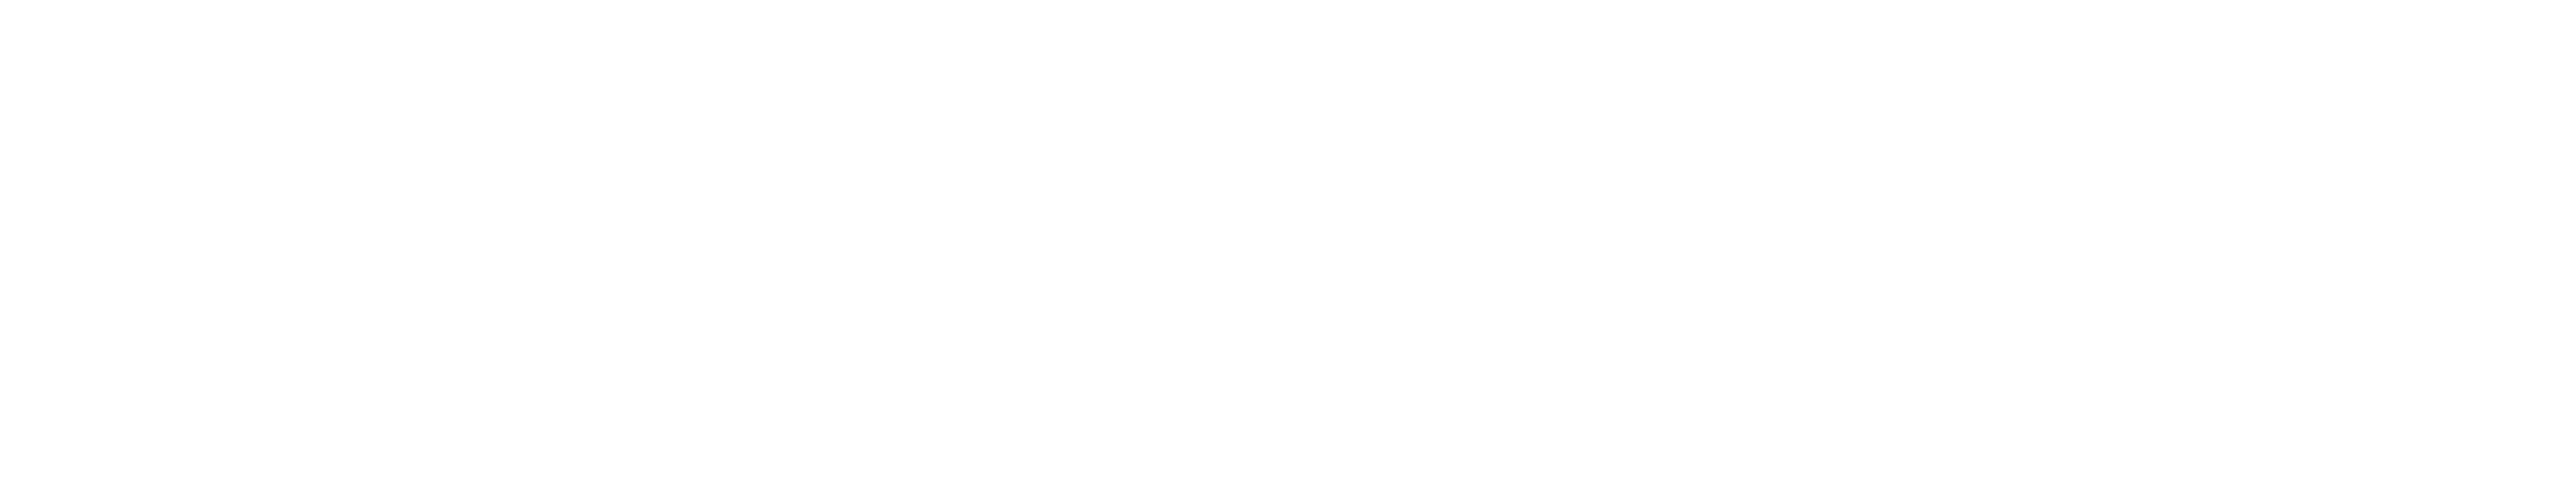 Integrity First Capital